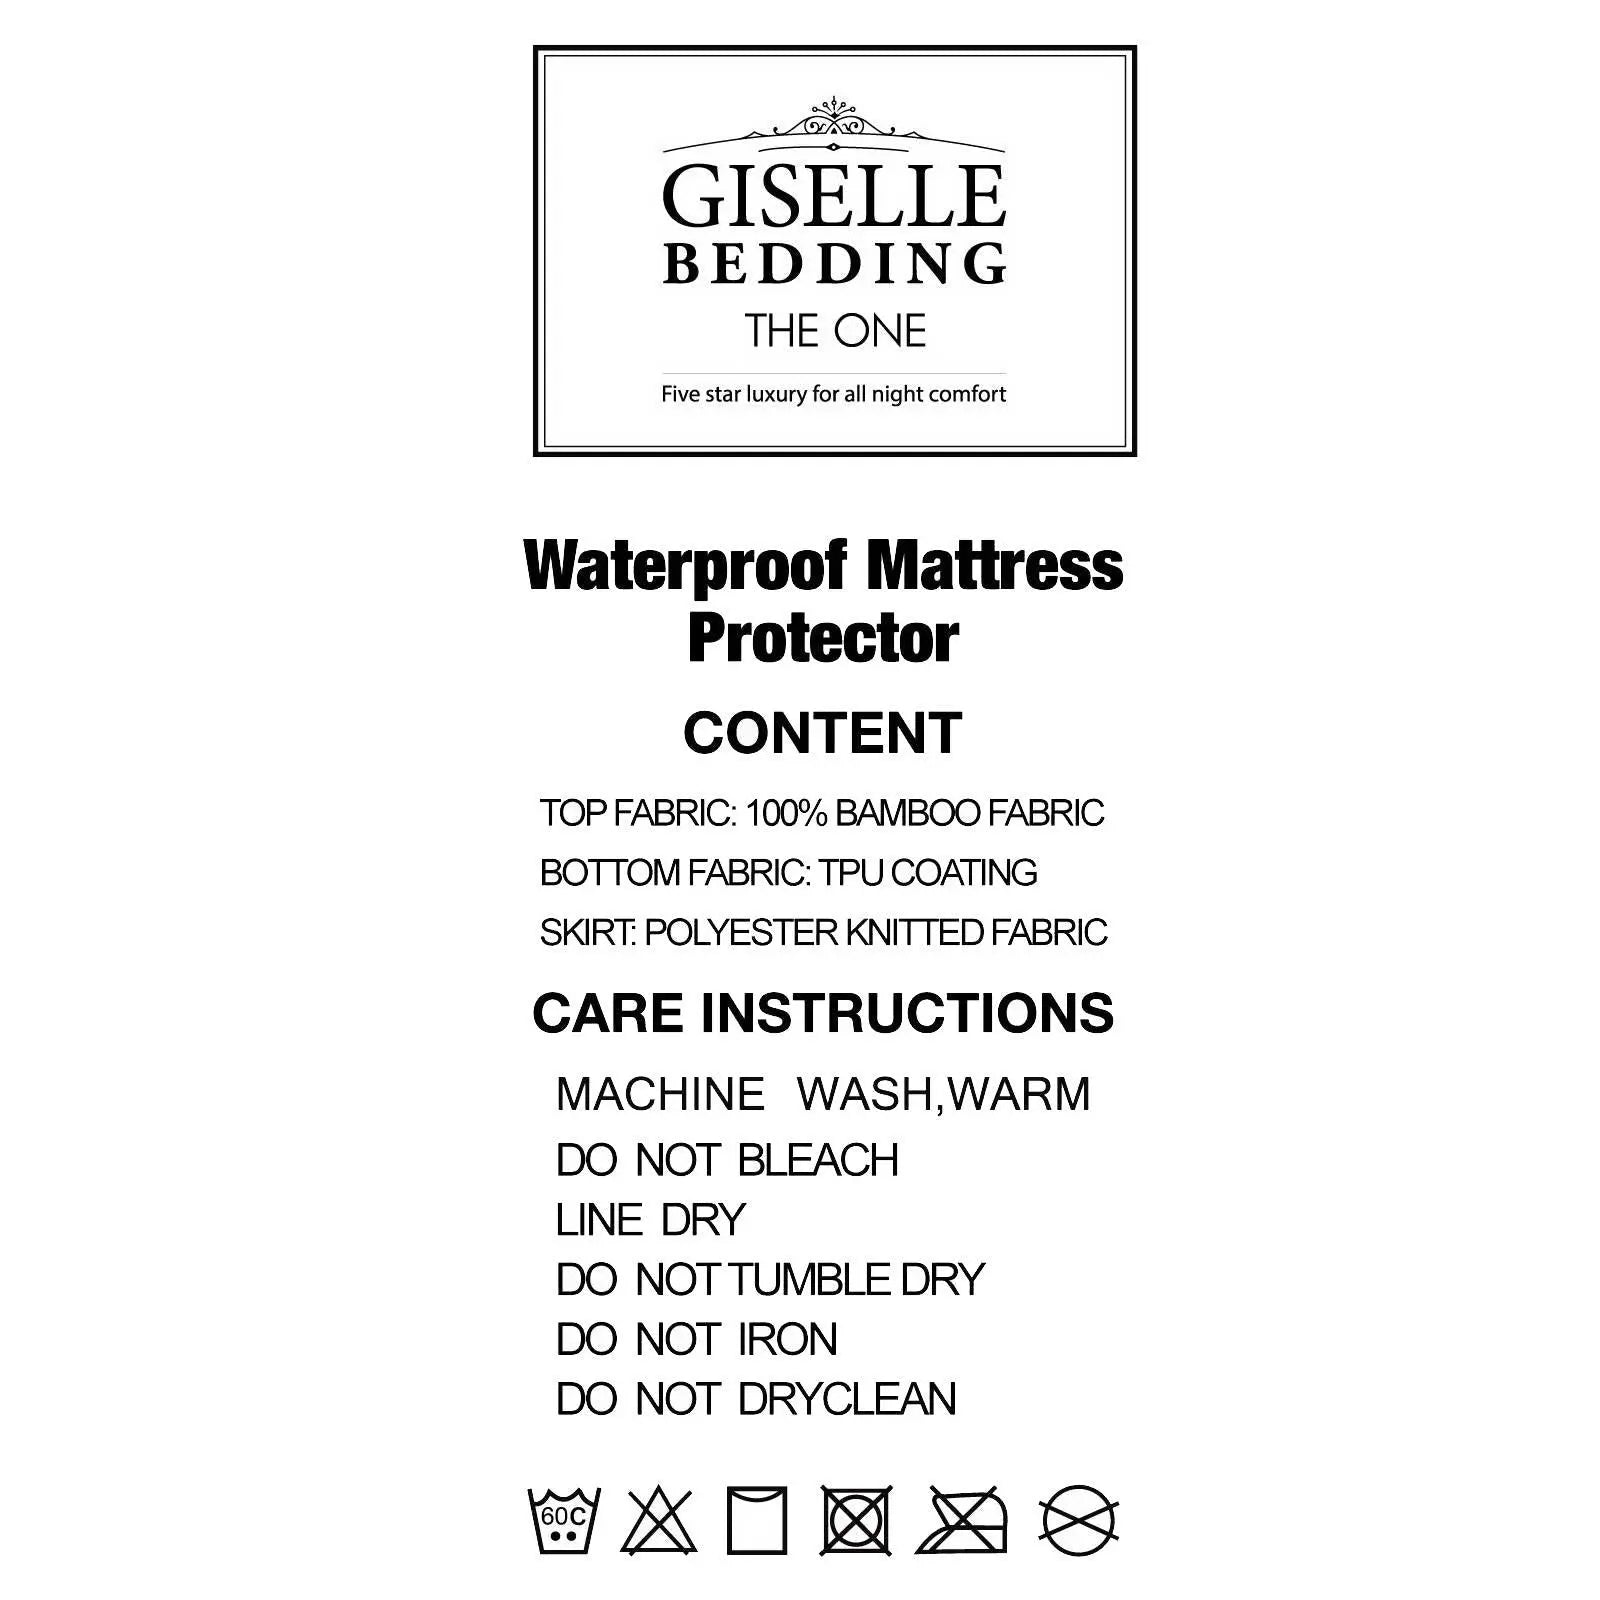 Giselle Bedding Double Size Waterproof Bamboo Mattress Protector Giselle